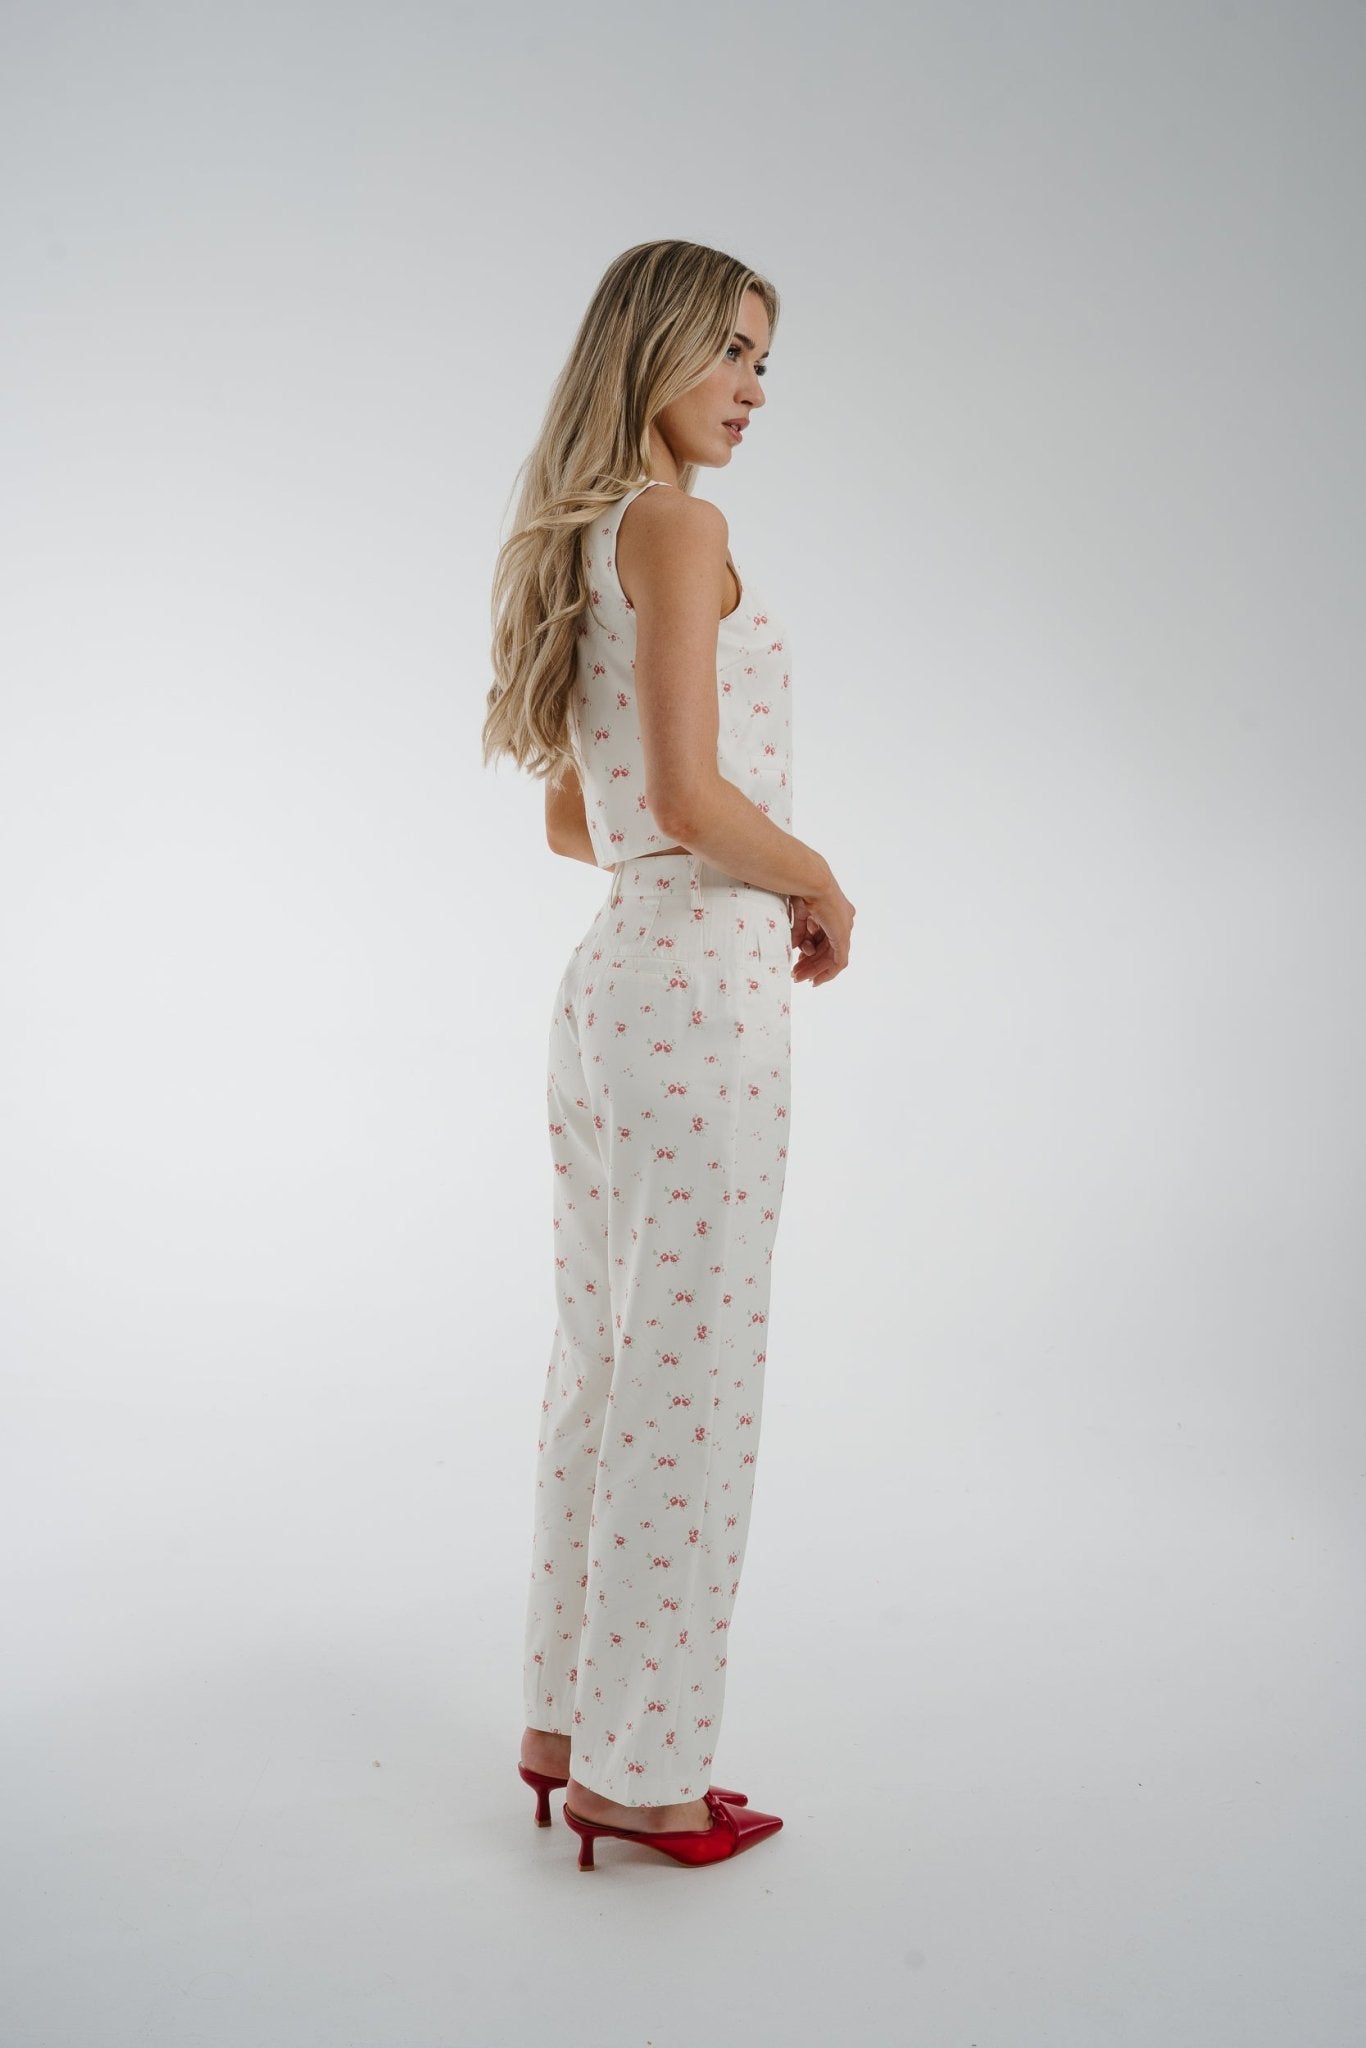 Elsa Floral Trousers In Pink Mix - The Walk in Wardrobe